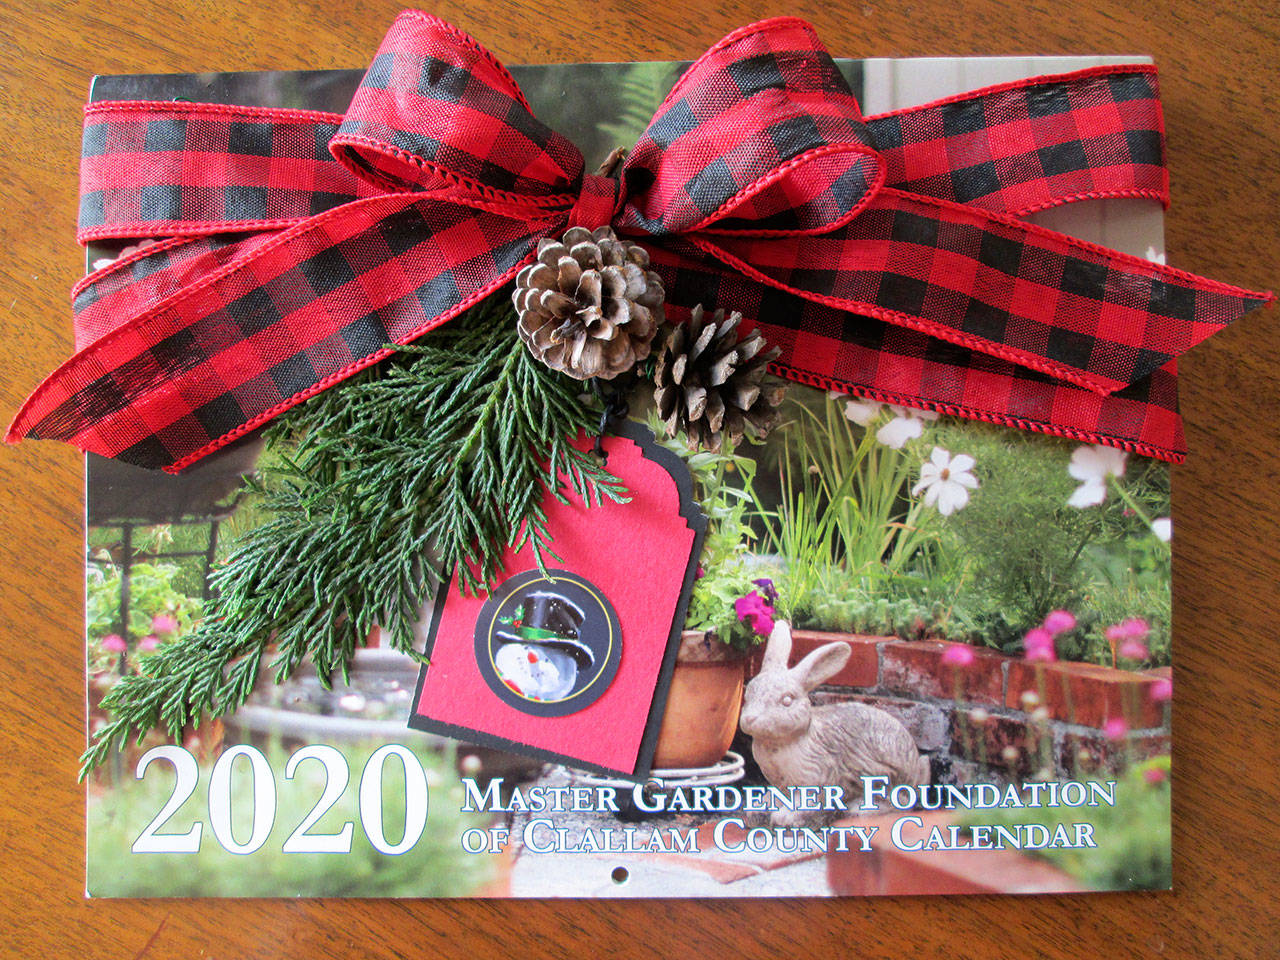 The 2020 Master Gardener Foundation Gardening Calendar is a great gift for local gardeners as it provides monthly gardening tips specific to Clallam County and reminders of upcoming gardening events, workshops and talks. Photo by Audreen Williams